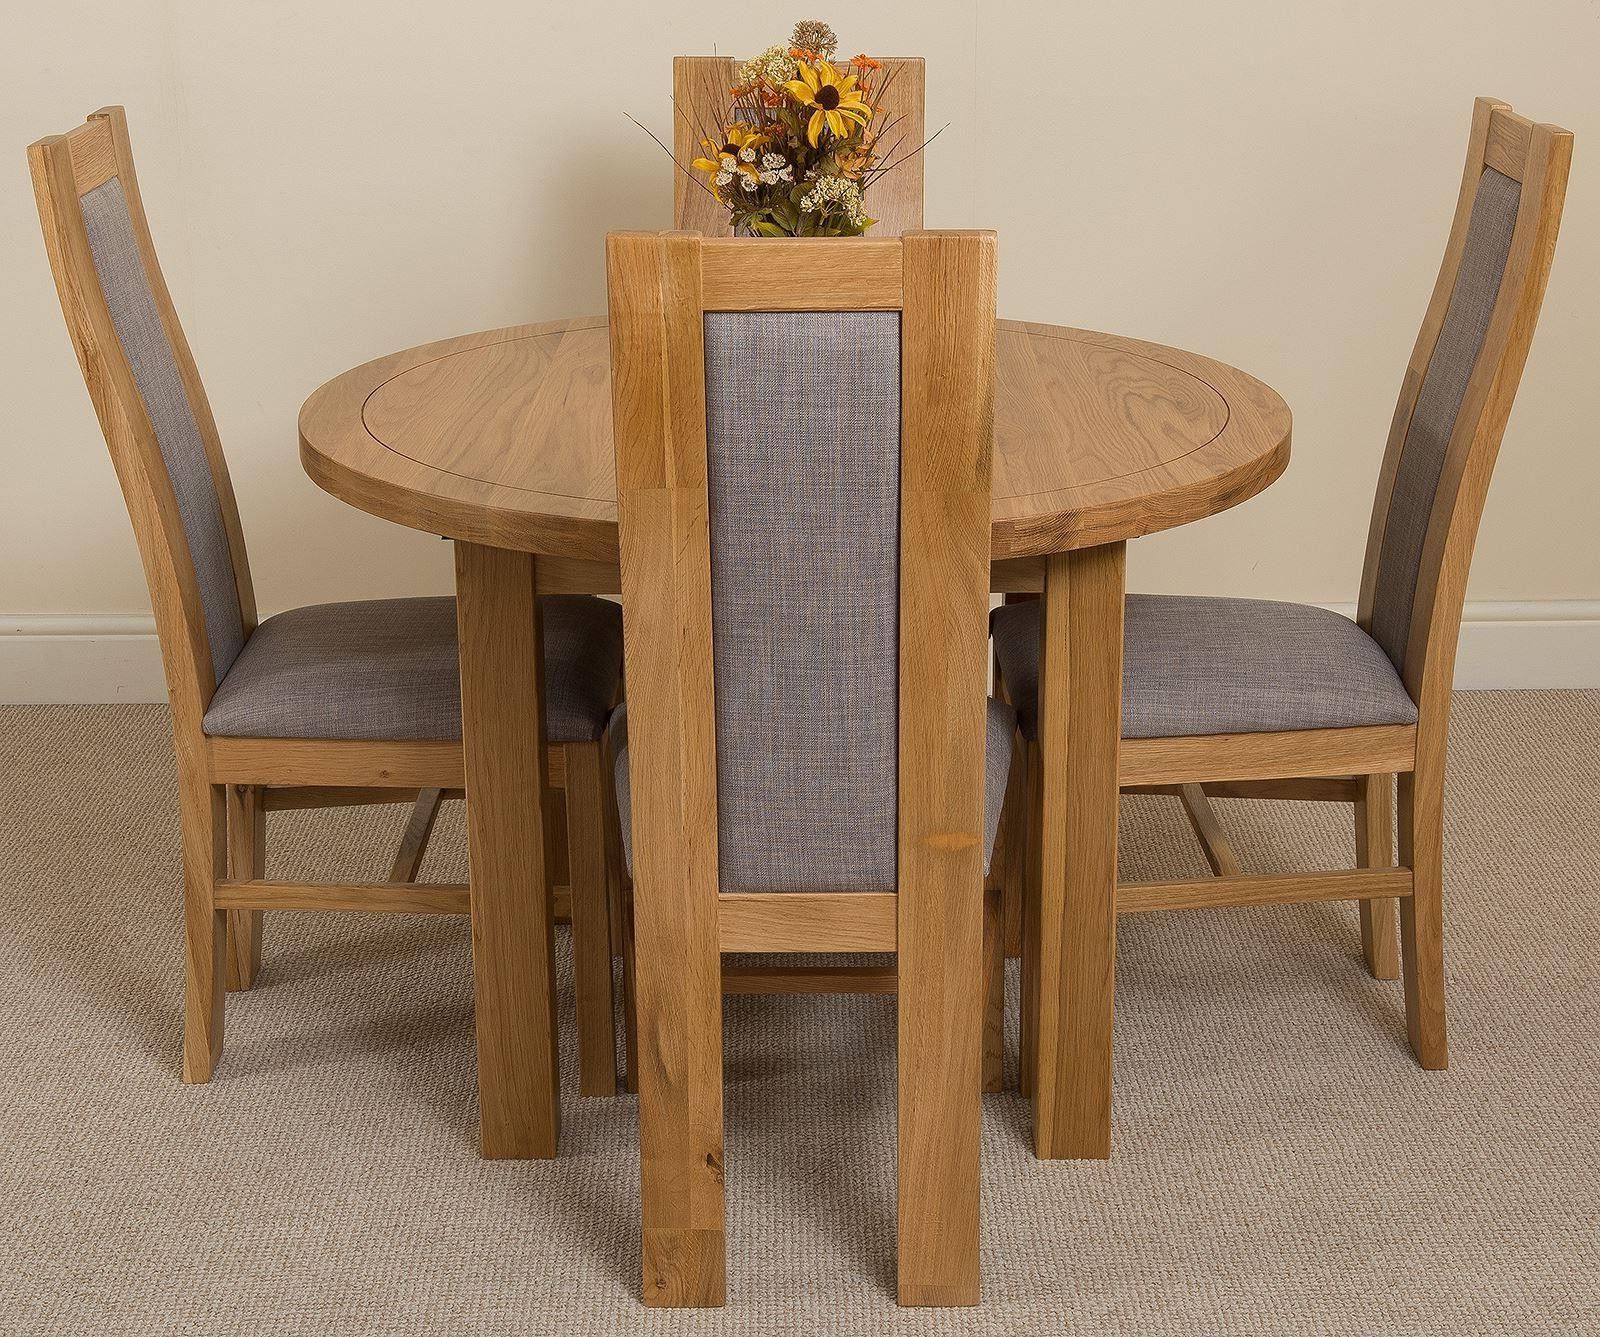 2019 Extendable Oval Patio Dining Sets In Edmonton Solid Oak Extending Oval Dining Table With 4 Stanford Solid (View 4 of 15)